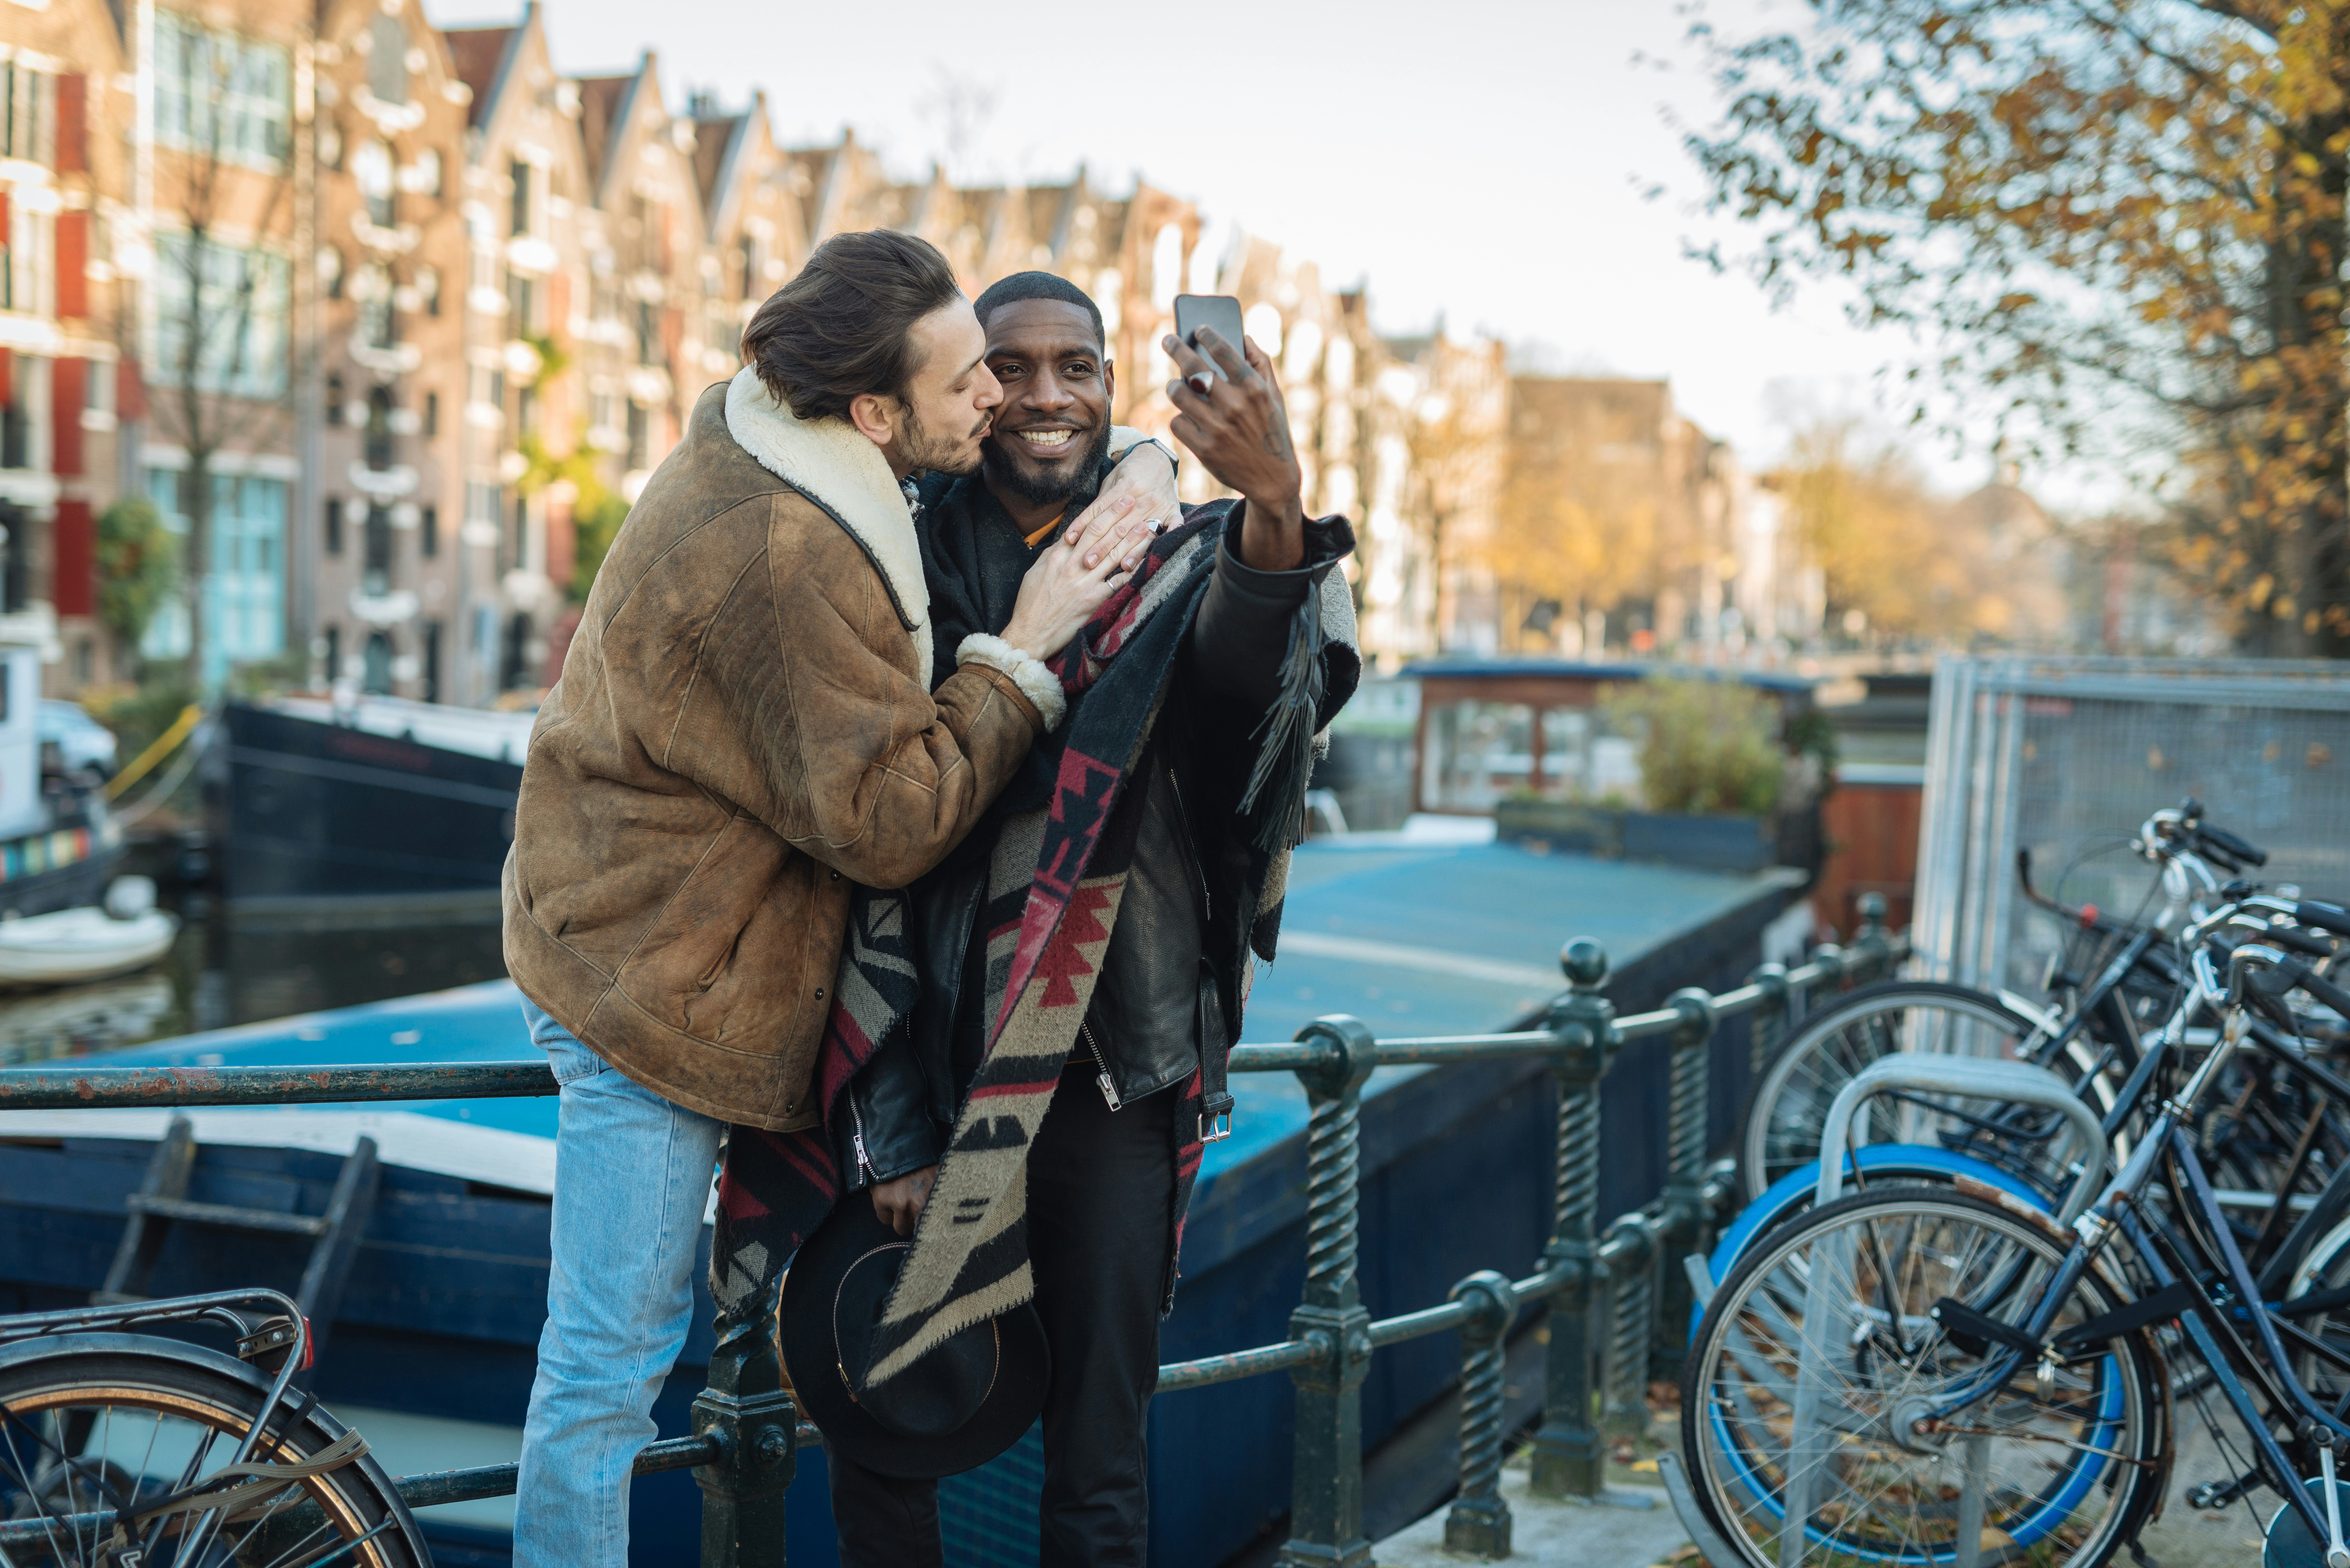 A couple pose for a selfie on the street in Amsterdam during late autumn